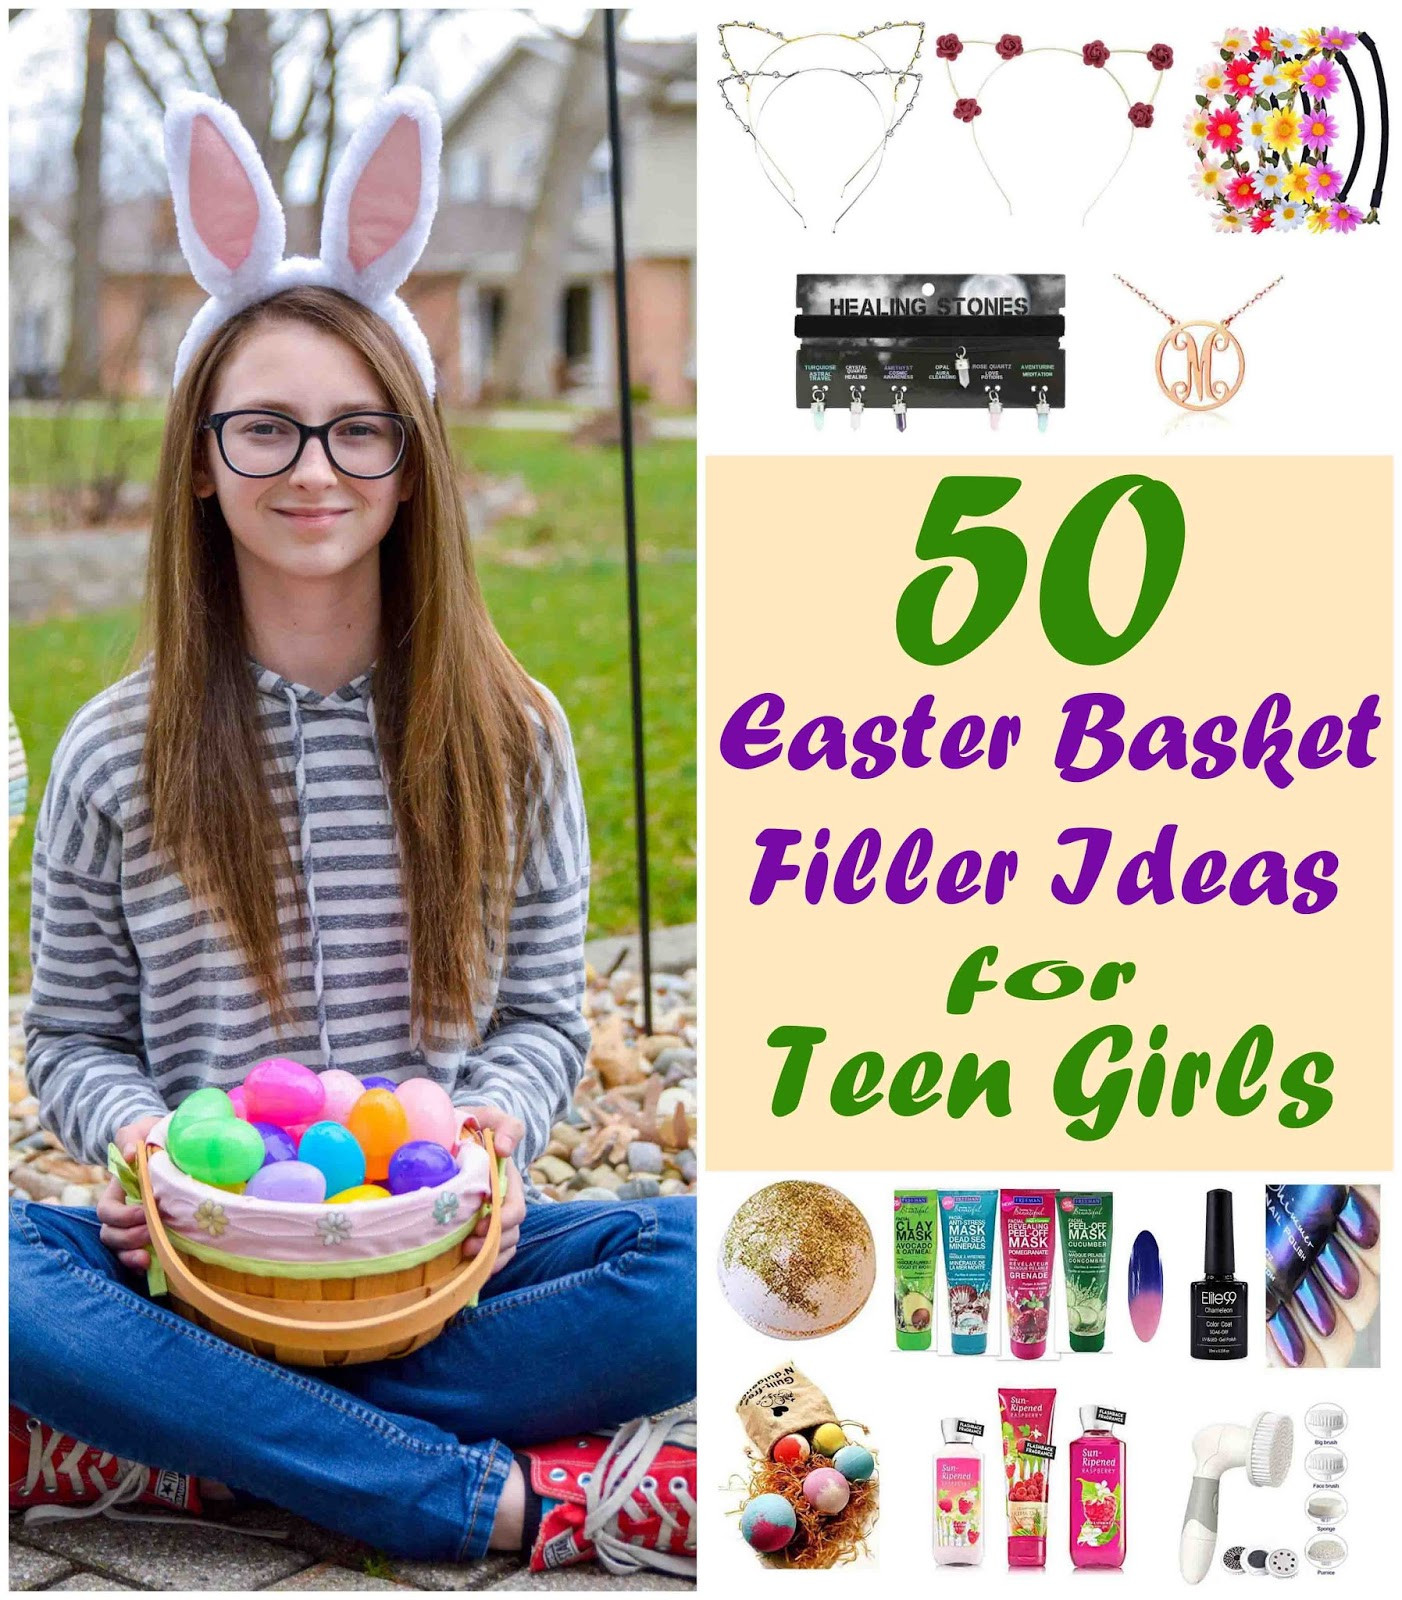 Teen Easter Basket Ideas
 Theresa s Mixed Nuts Allison s Top 50 Easter Basket